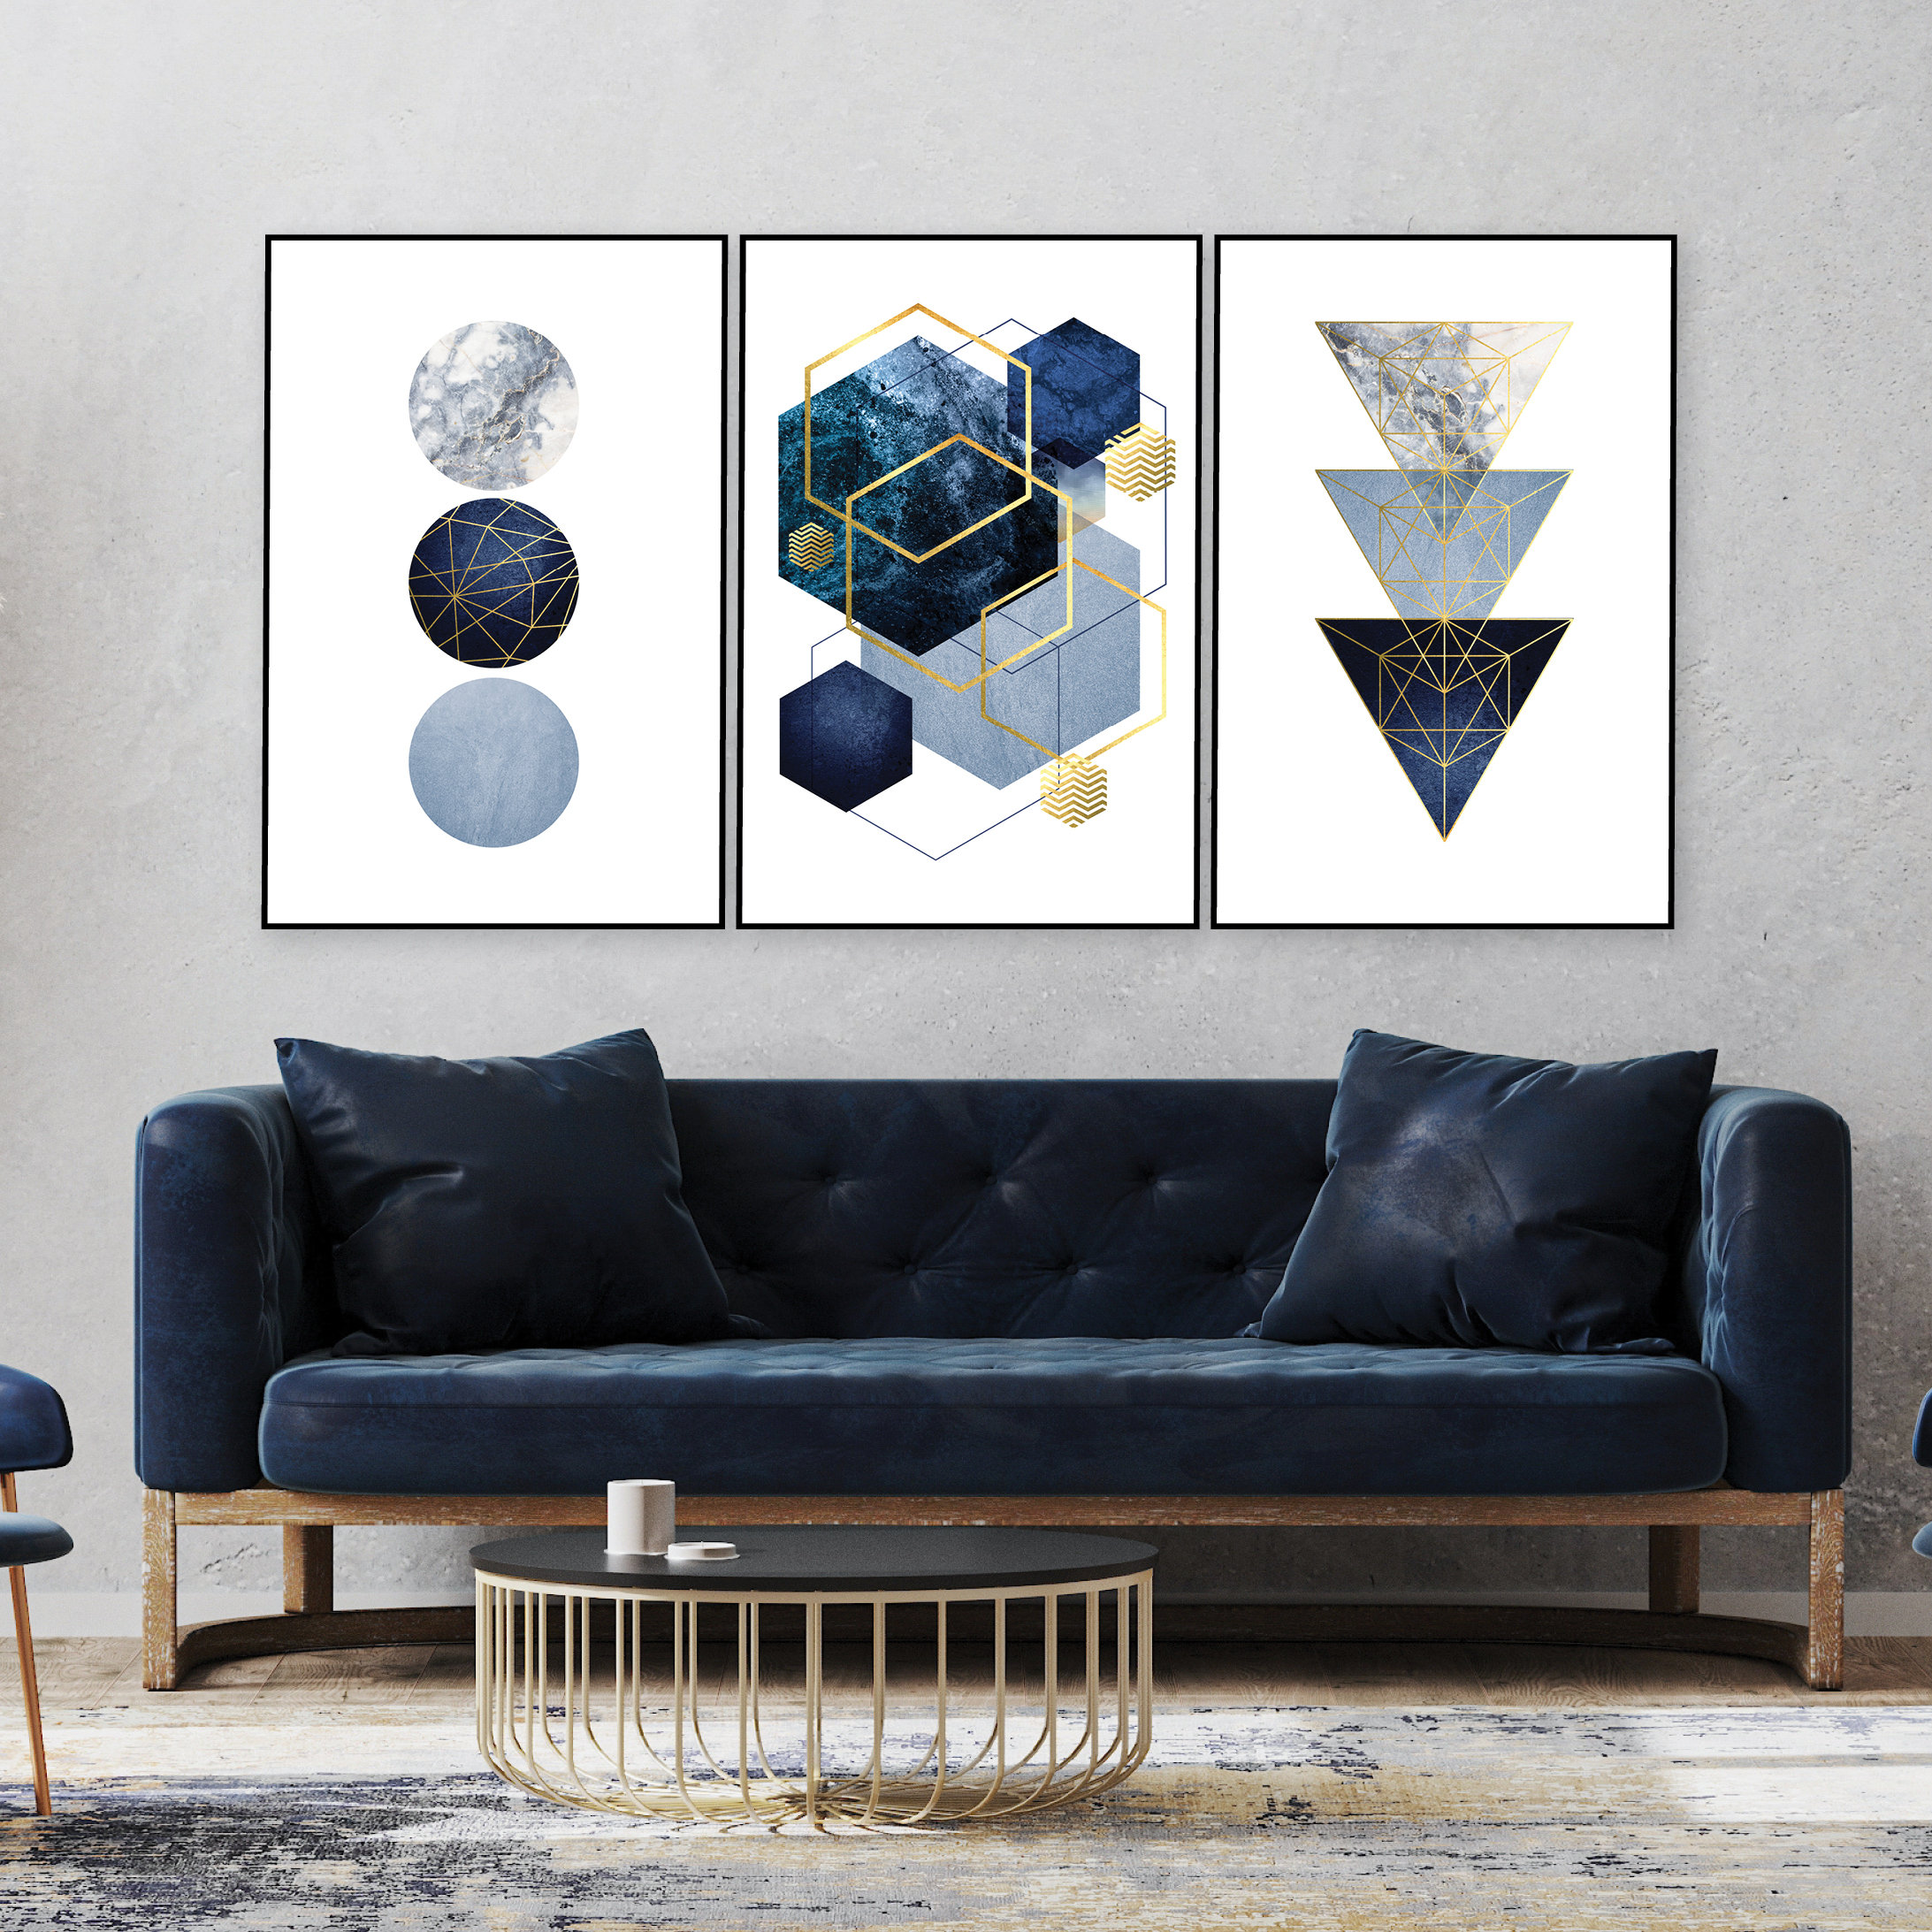 Set of Downloadable Digital Download Decor A1 Art Wall Geometric Instant Etsy Posters - Printable Prints Gold Minimalist Art 3 Download Navy Blue